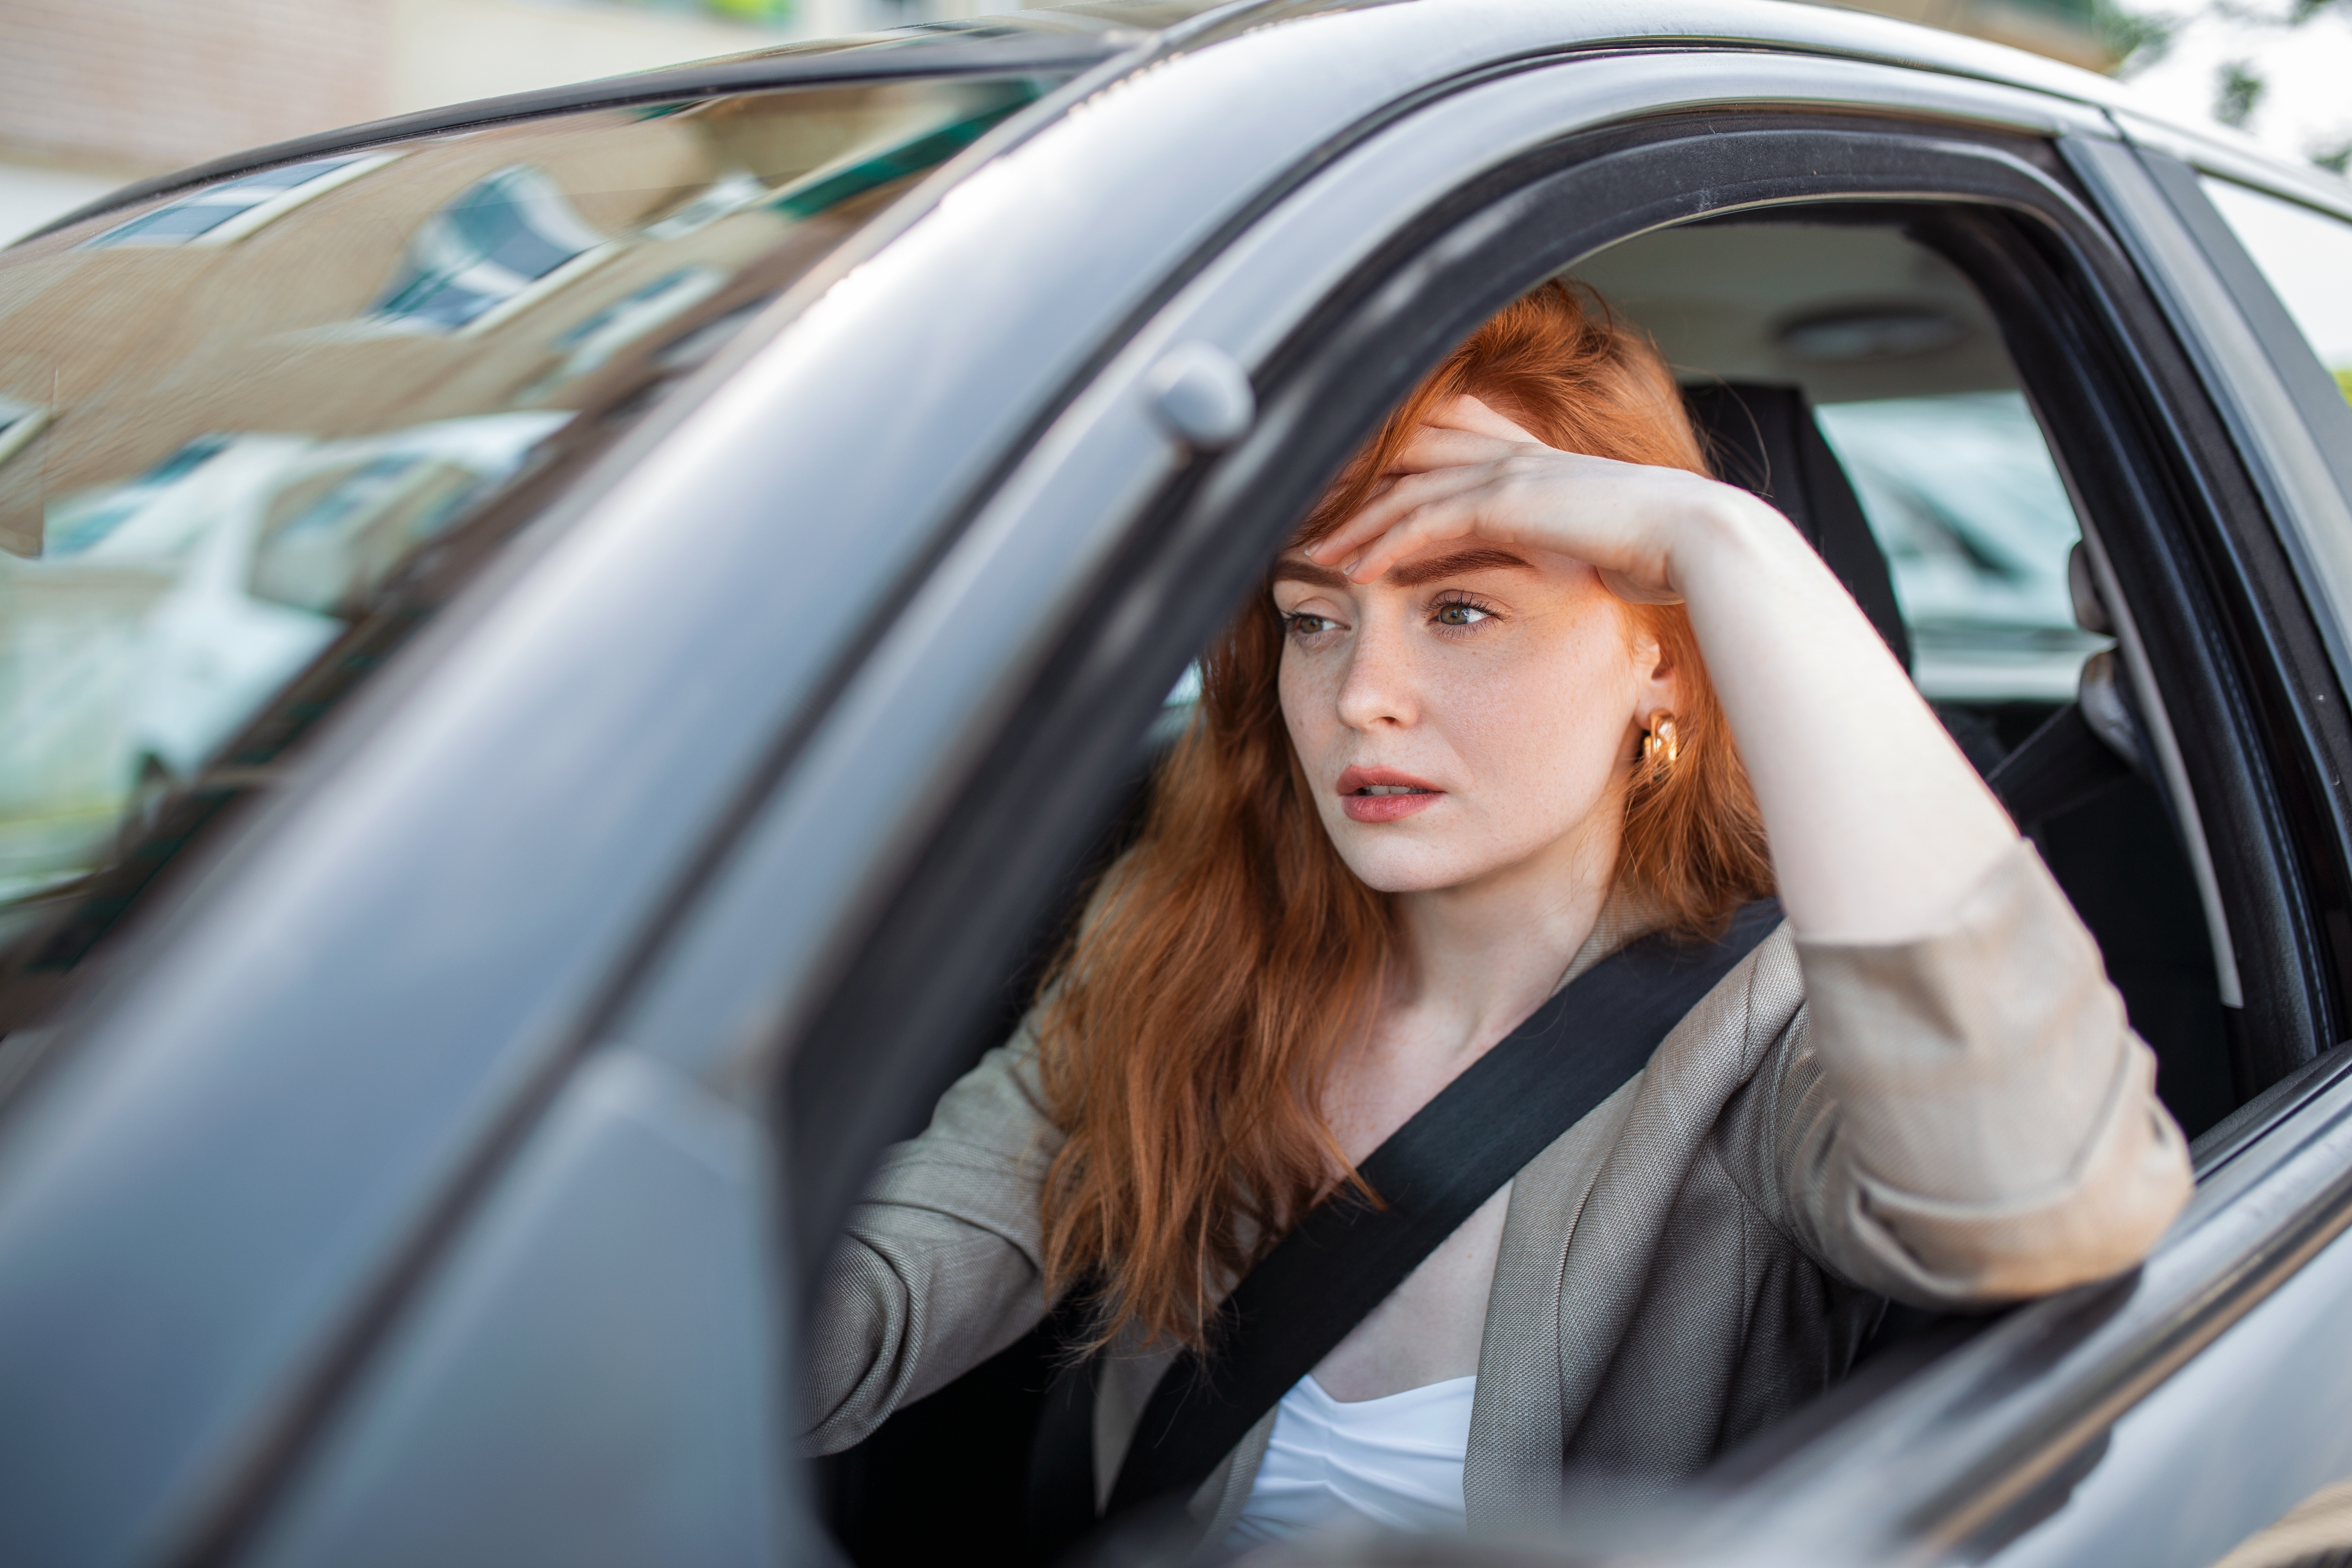 A stressed woman driving a car | Source: Shutterstock